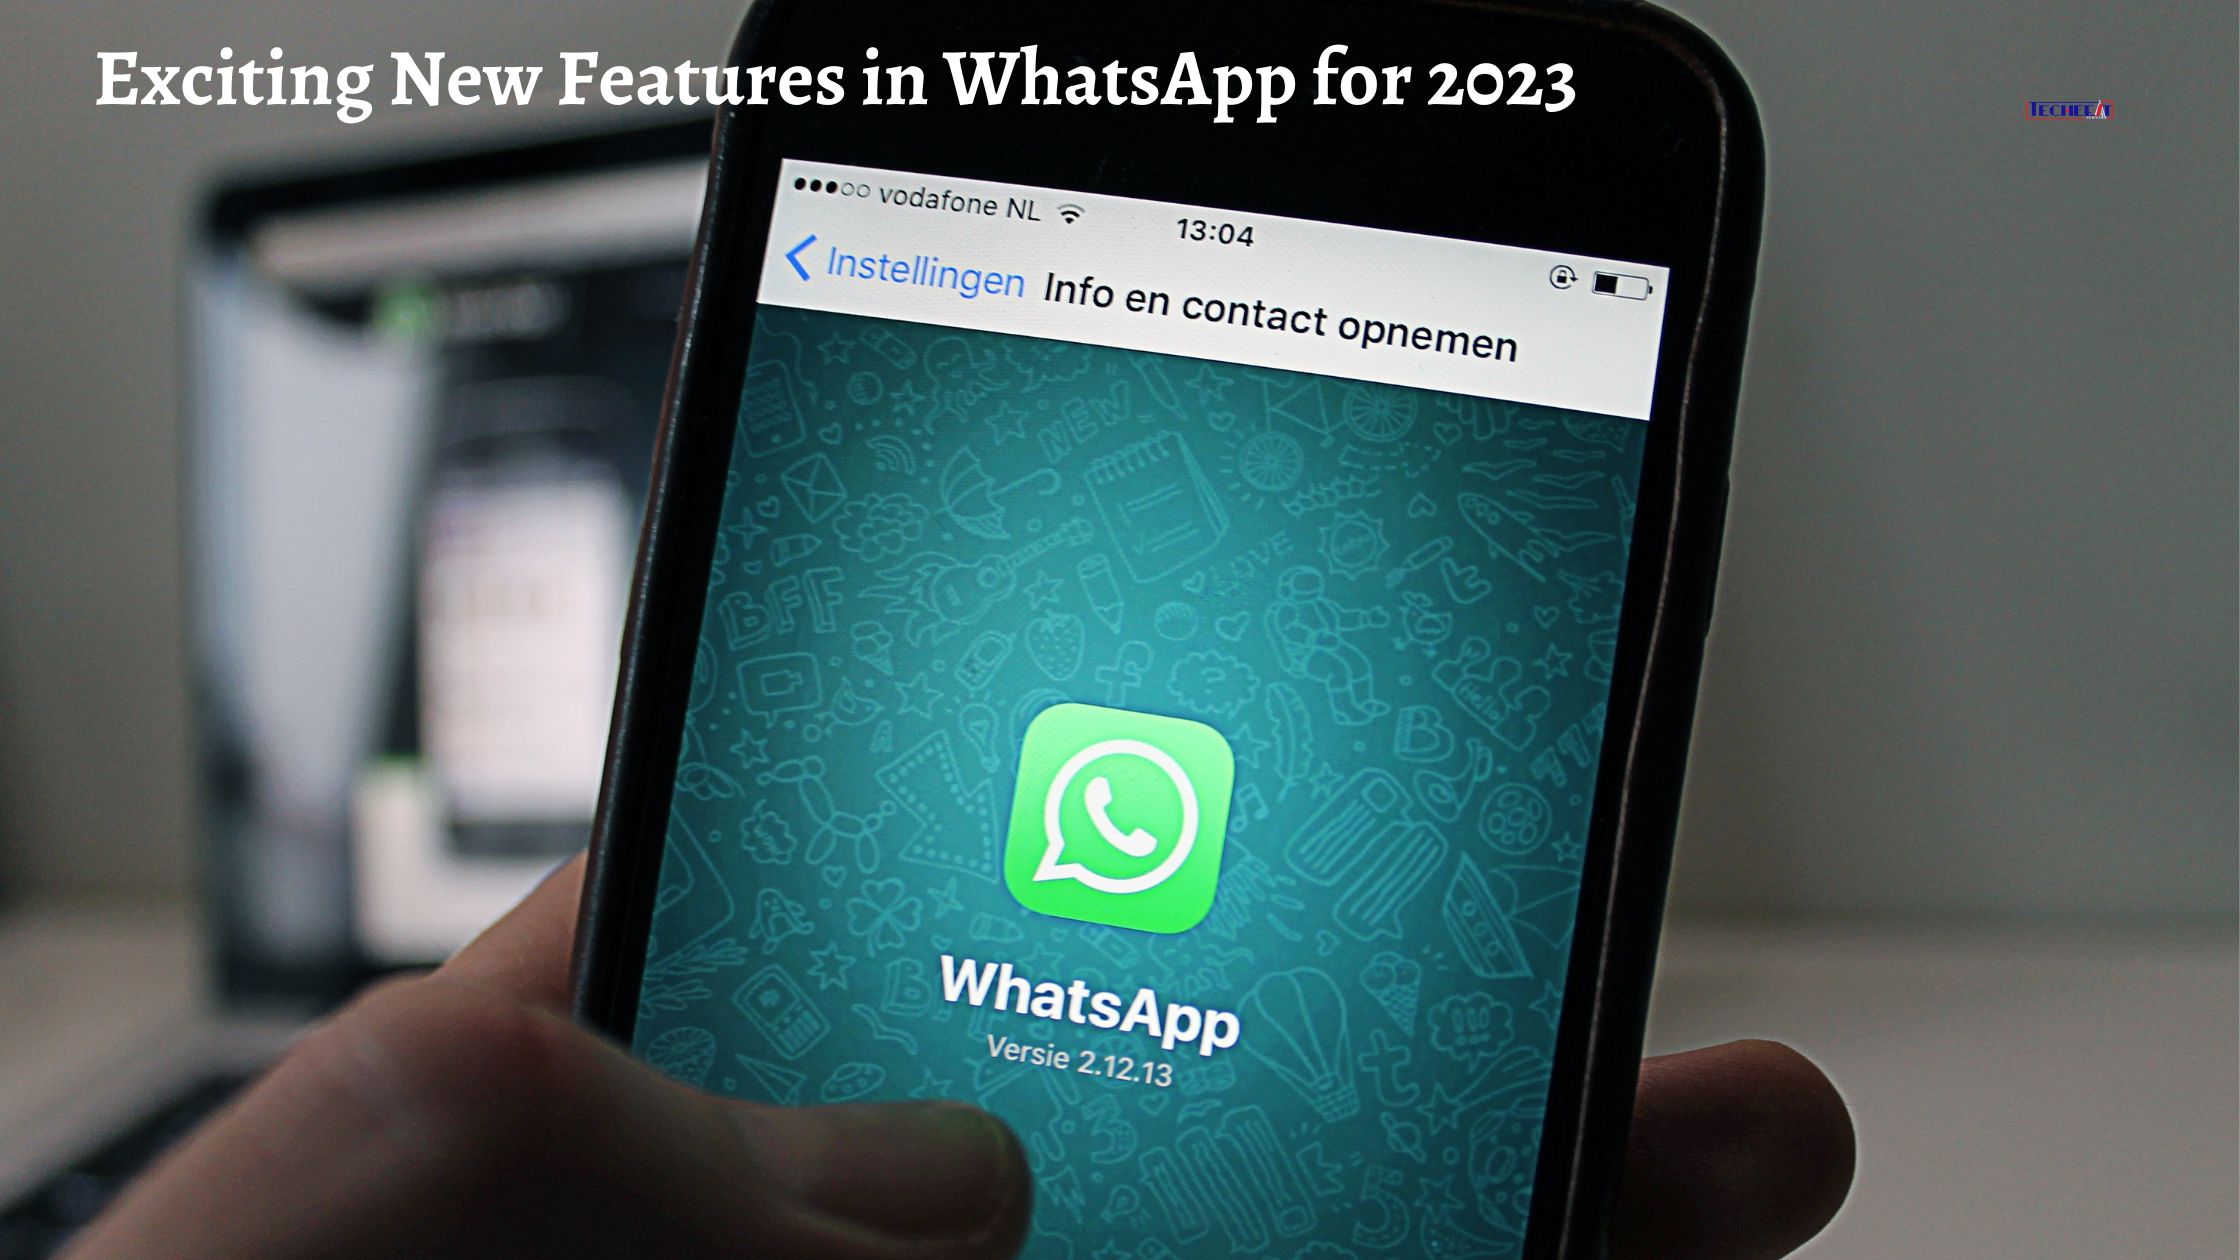 Exciting New Features in WhatsApp for 2023